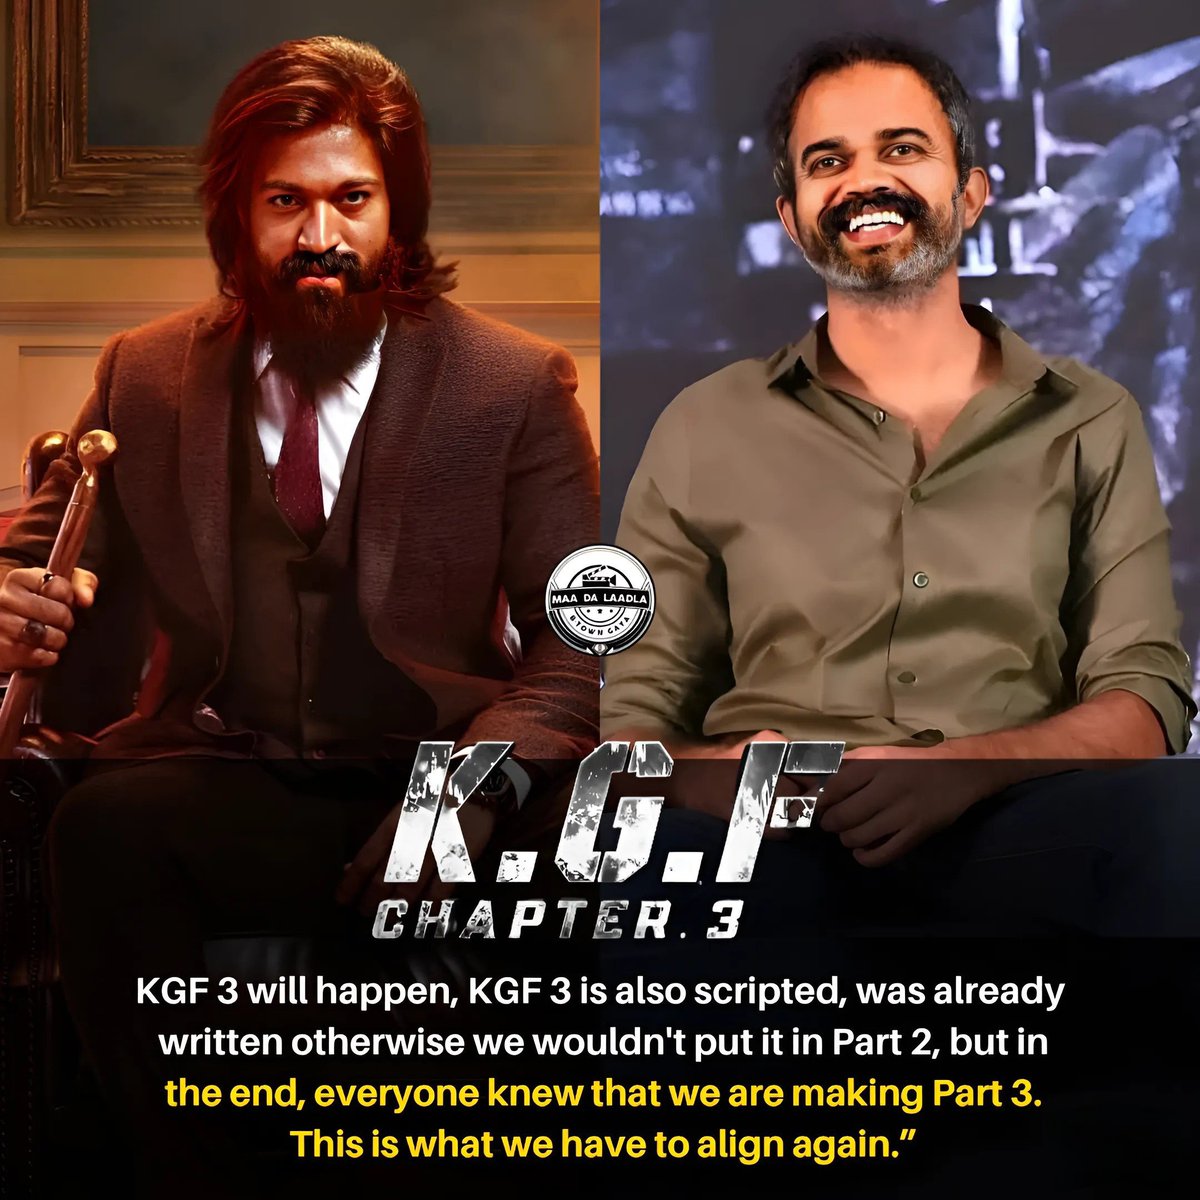 “#KGF3 will happen, KGF 3 is also scripted, was already written otherwise we wouldn't put it in Part 2, but in the end, everyone knew that we are making Part 3. This is what we have to align again.” 🔥🔥🔥 #KGFChapter3

#KGF #KGF2 #KGFChapter2 #PrashanthNeel #SuryaCinefinite